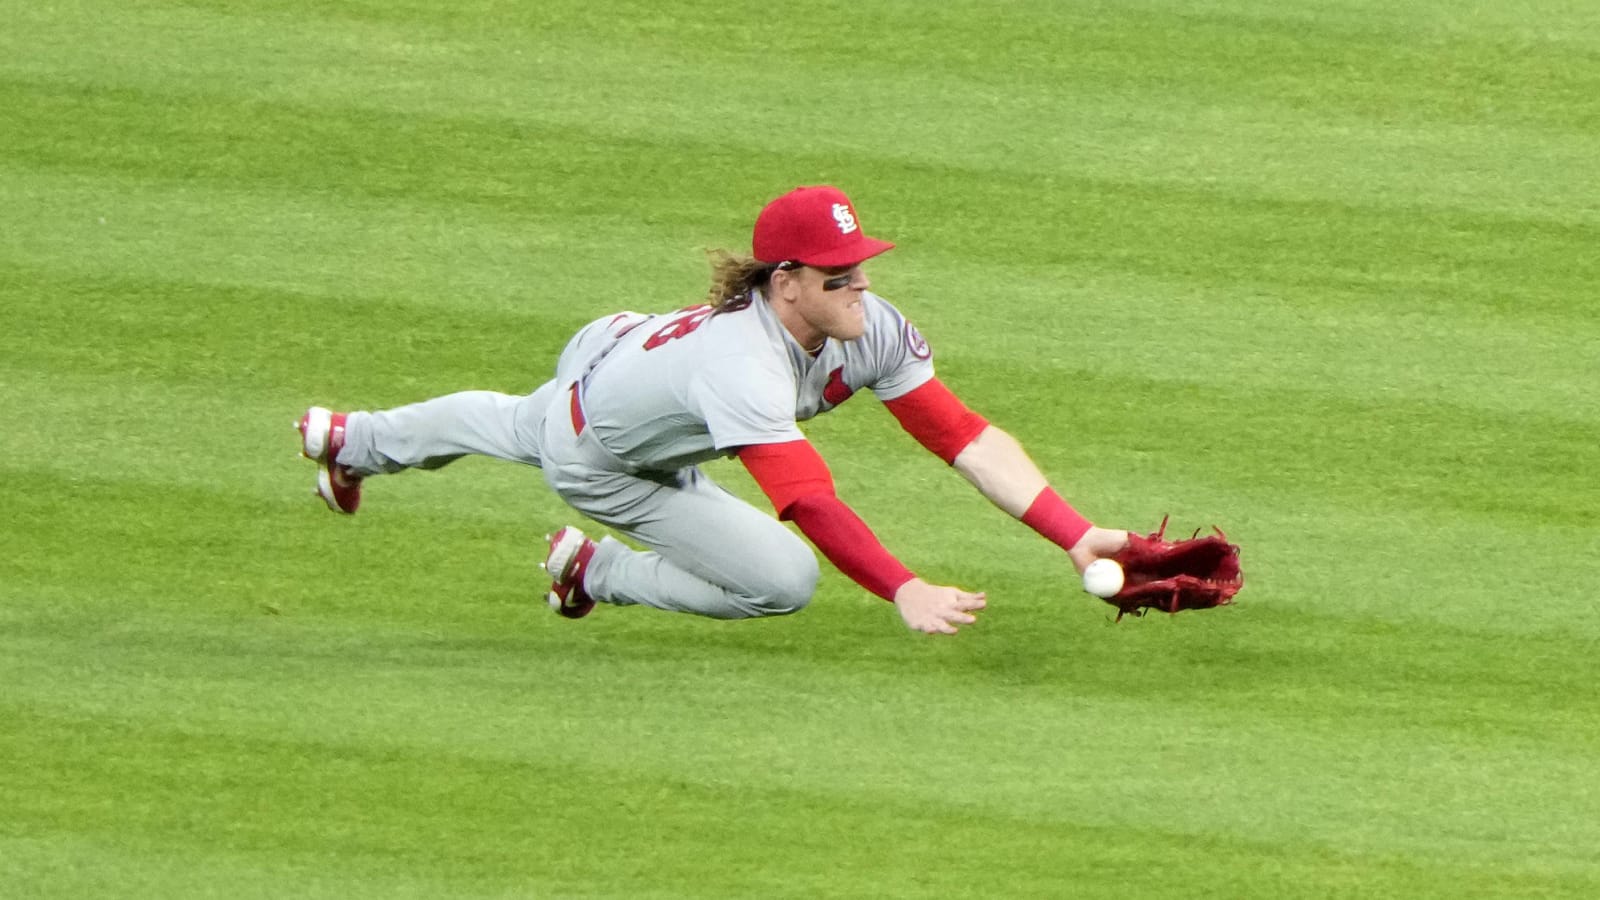 Cardinals outfielder Harrison Bader on IL with rib fracture